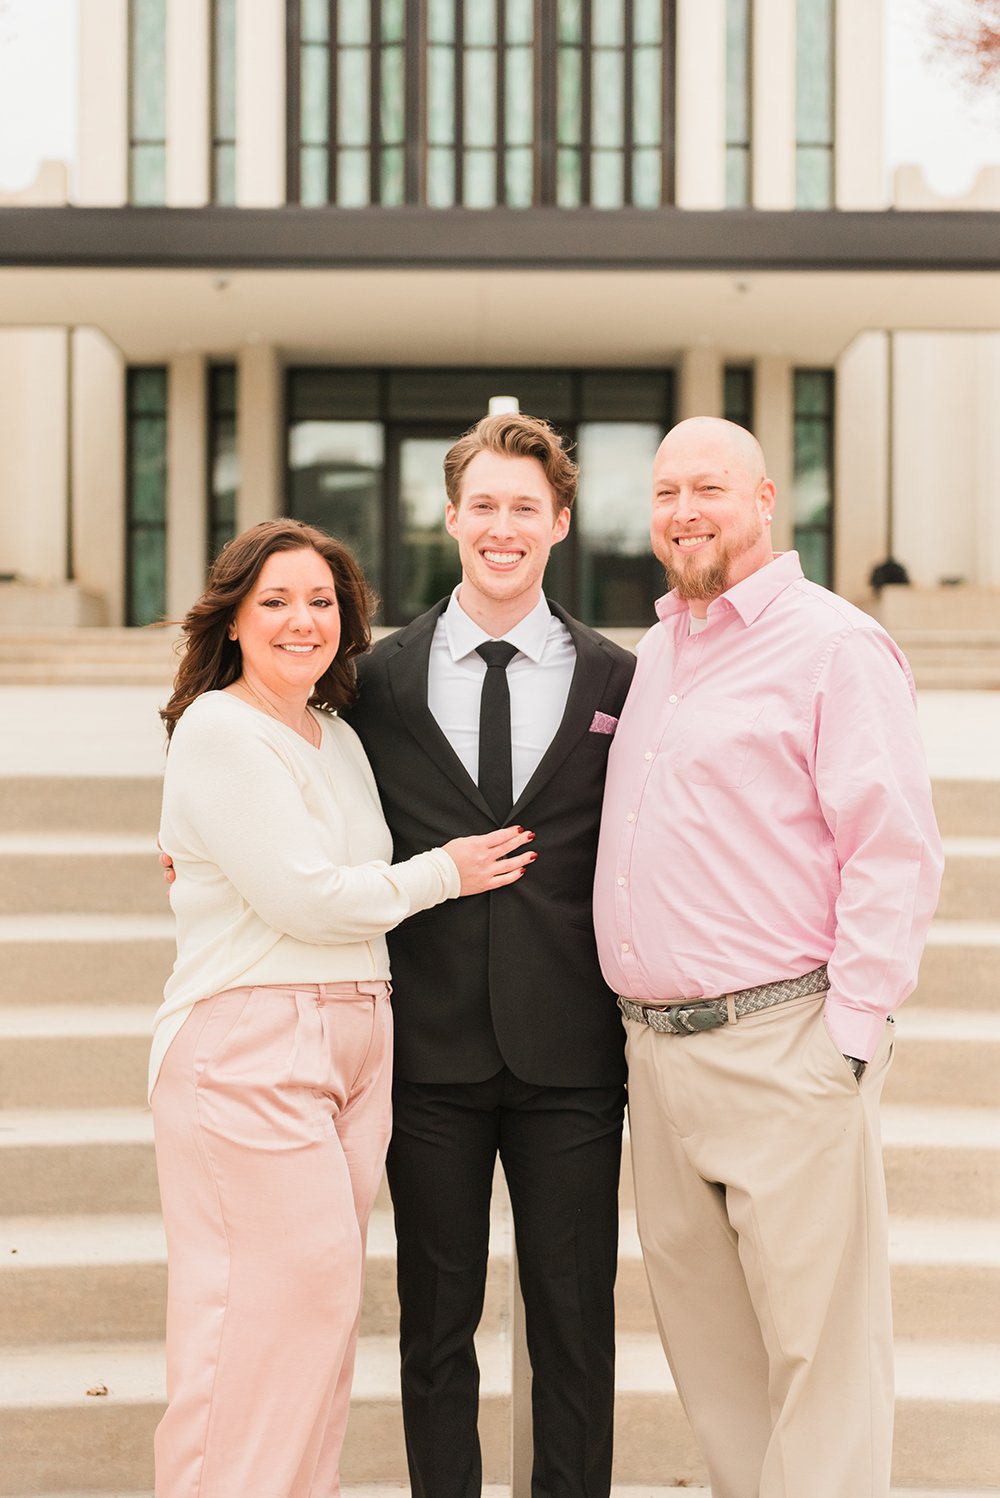  A groom stands with his mom and dad in front of the Atlanta, Georgia LDS temple. wedding photographer Atlanta photographer Sharpsburg Roswell #weddingphotographer #ldsweddings #atlantatemple #jacquieerickson #parentsofthegroomphoto 